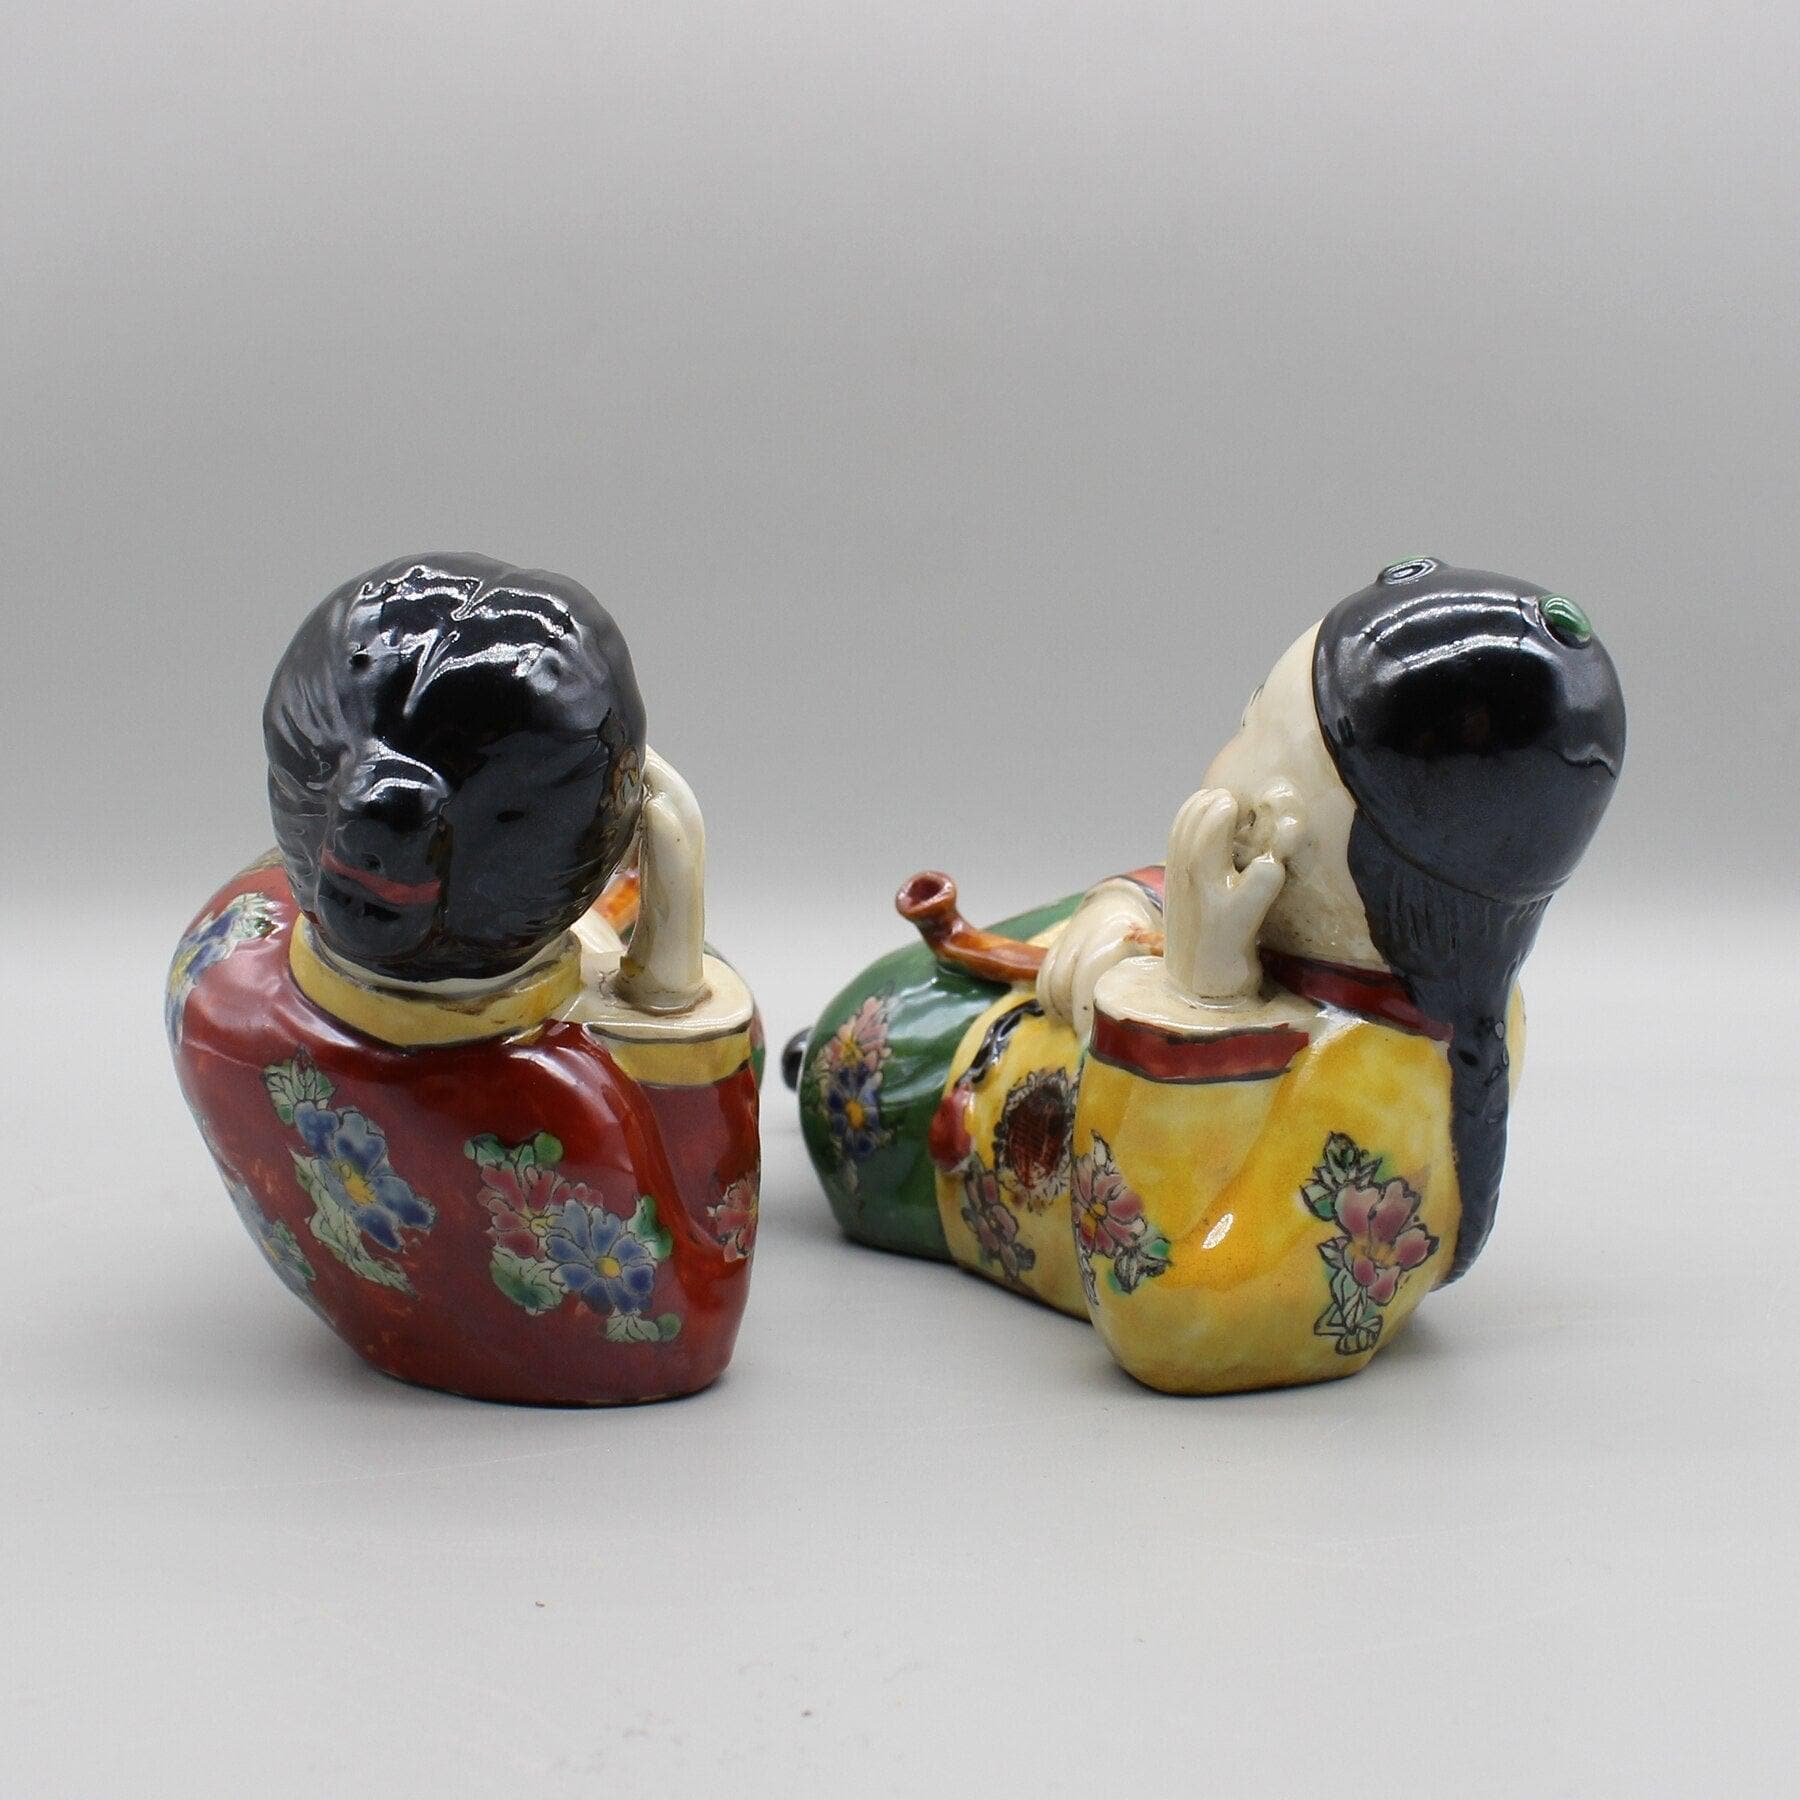 Hand Painted Traditional Chinese Men Figurines - 2 pcs - MAIA HOMES